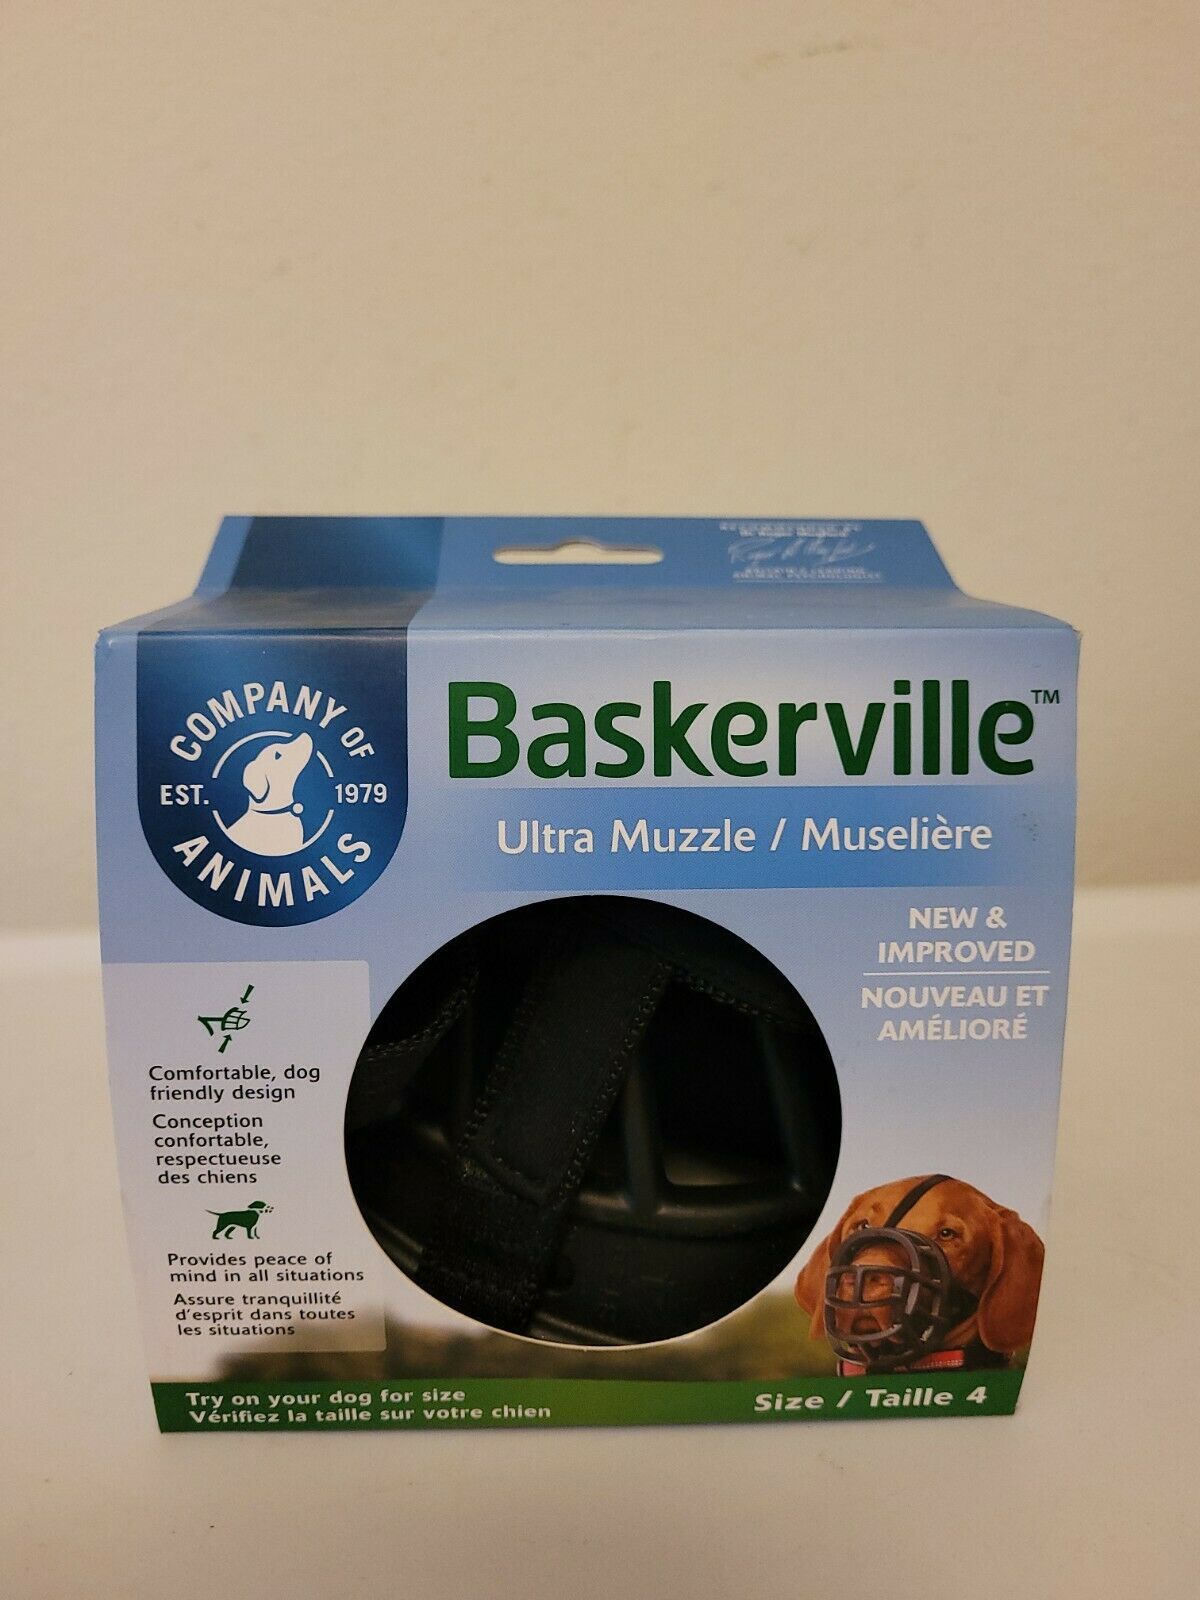 Baskerville Ultra Muzzle For Dogs Size 4 Black Permits Panting & Drinking